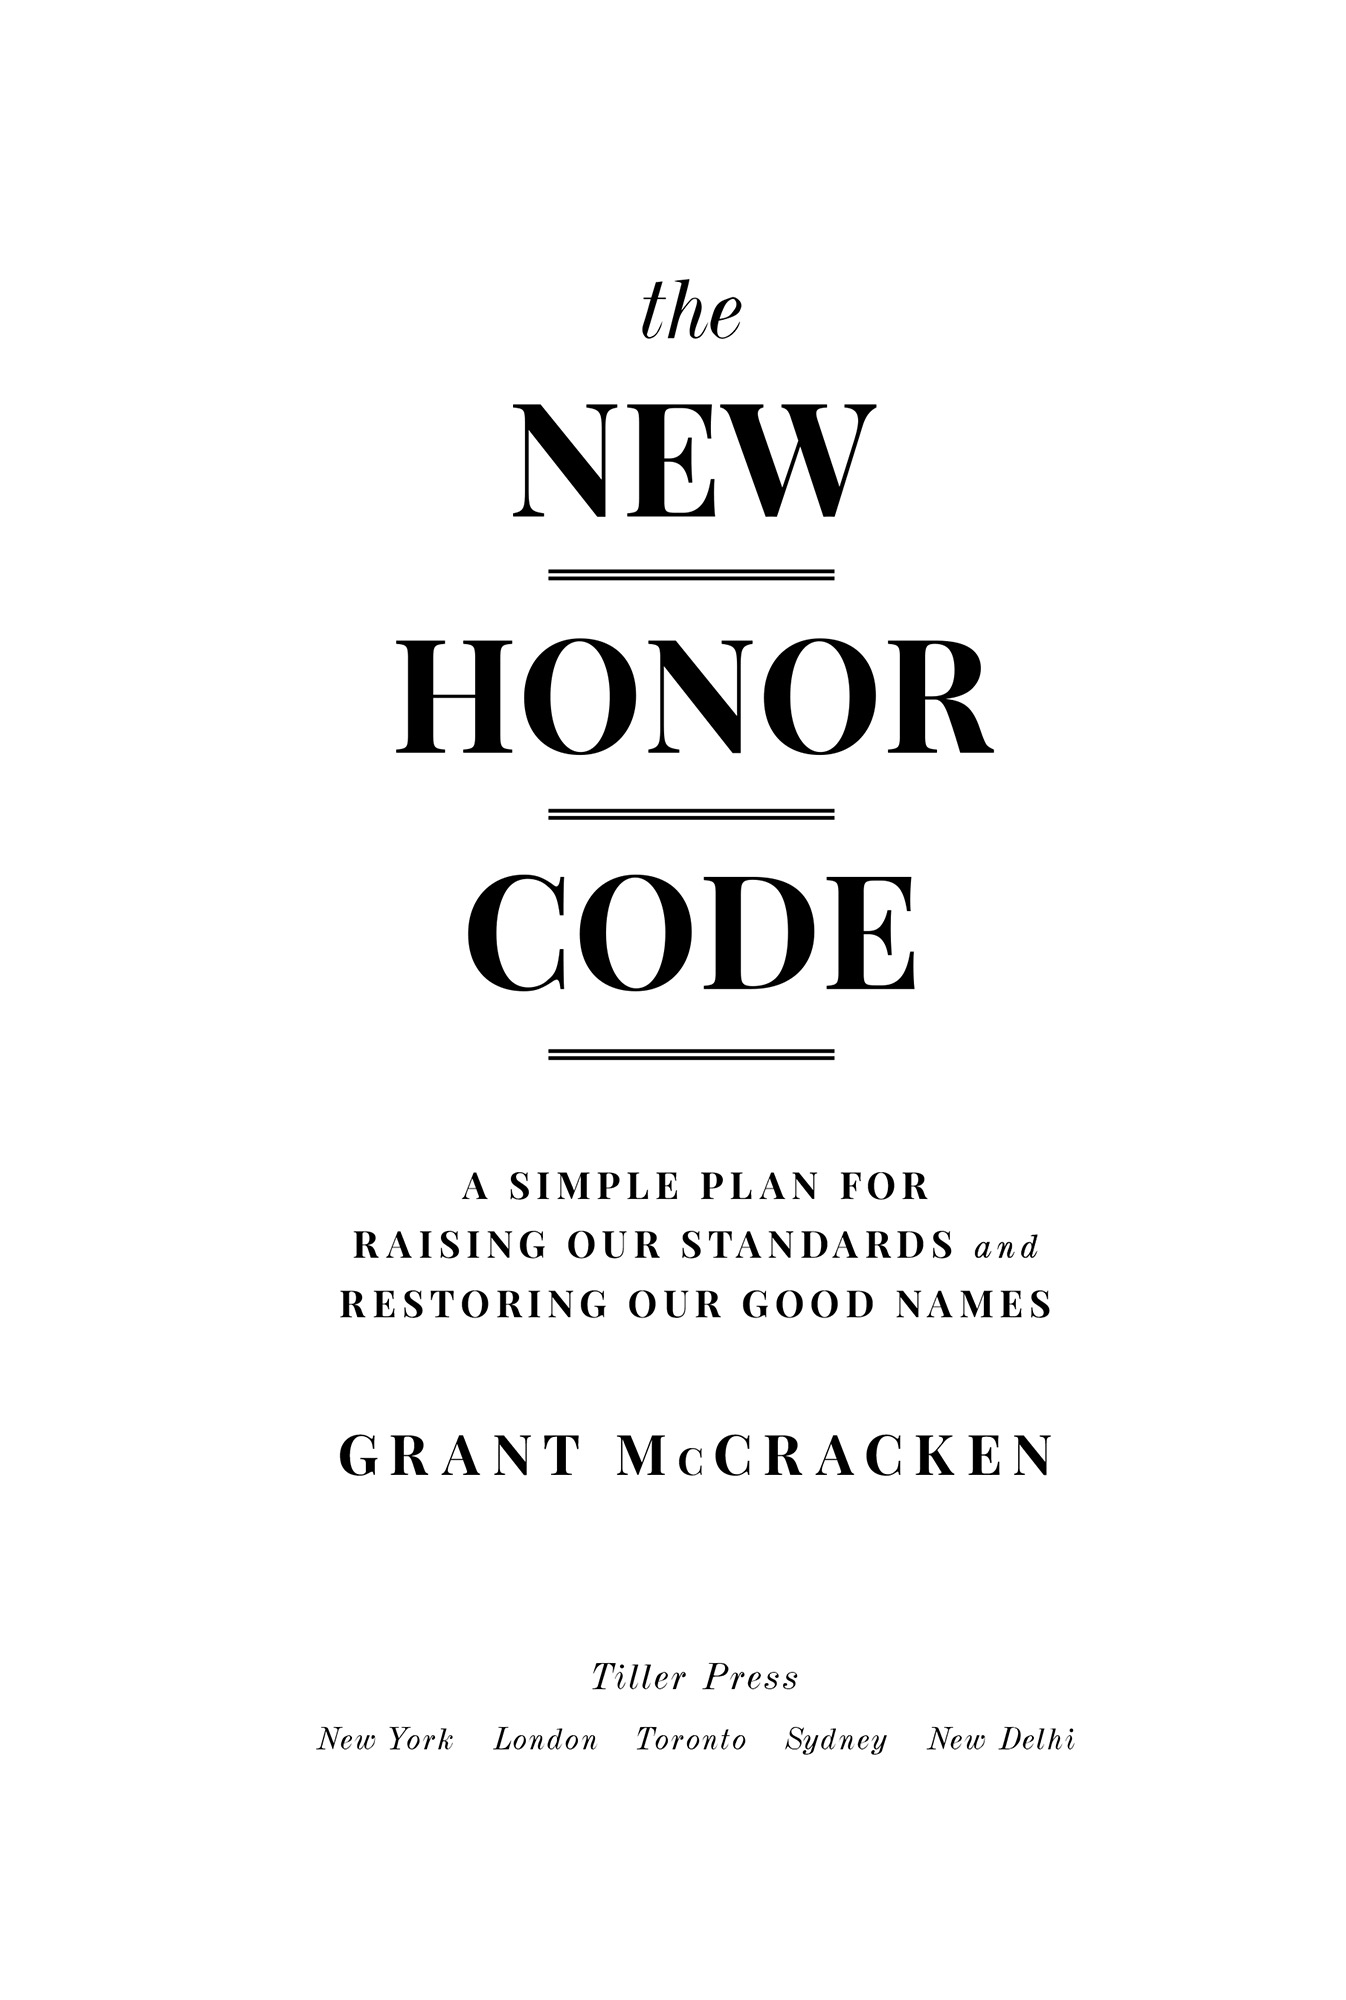 The New Honor Code A Simple Plan for Raising Our Standards and Restoring Our Good Names - image 2